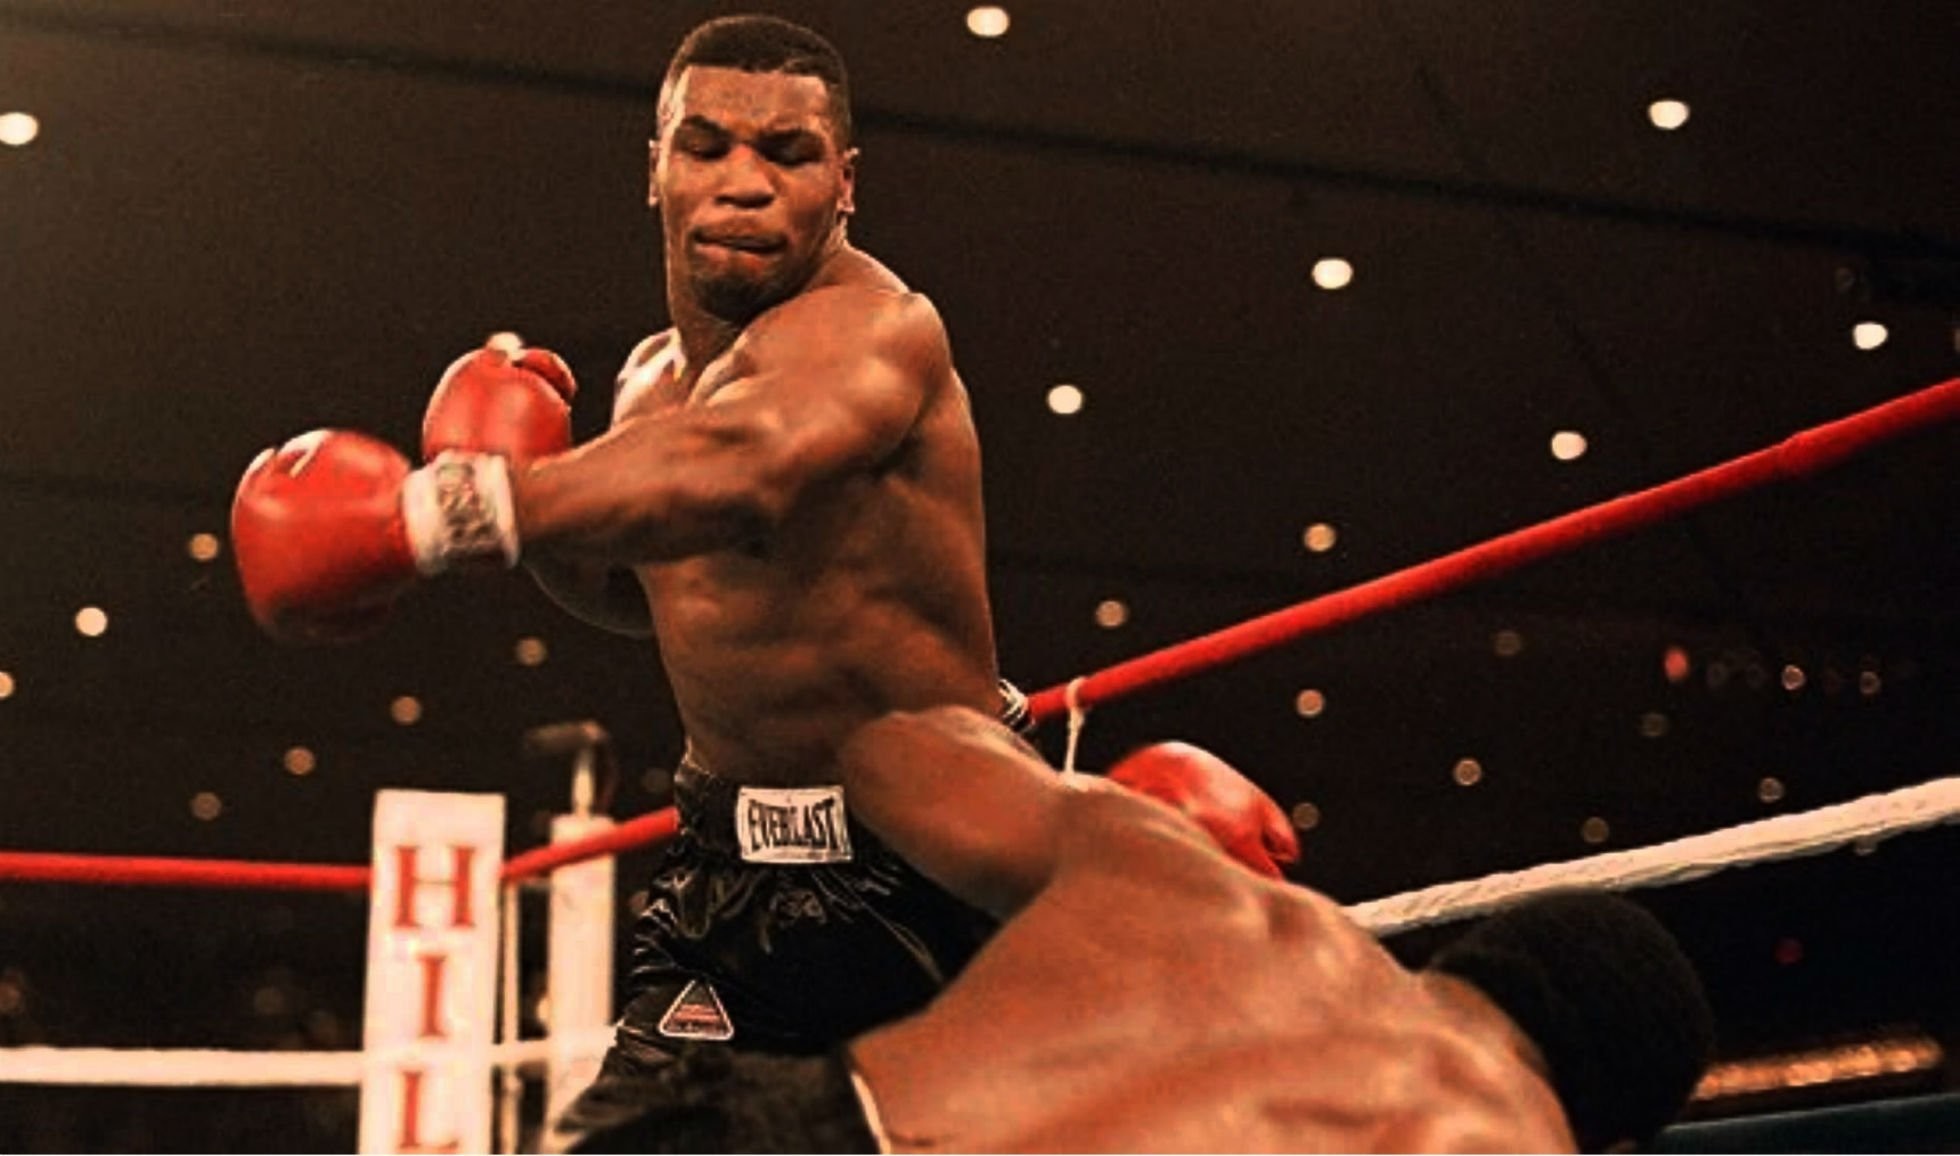 Mike Tyson Wallpaper 74 pictures